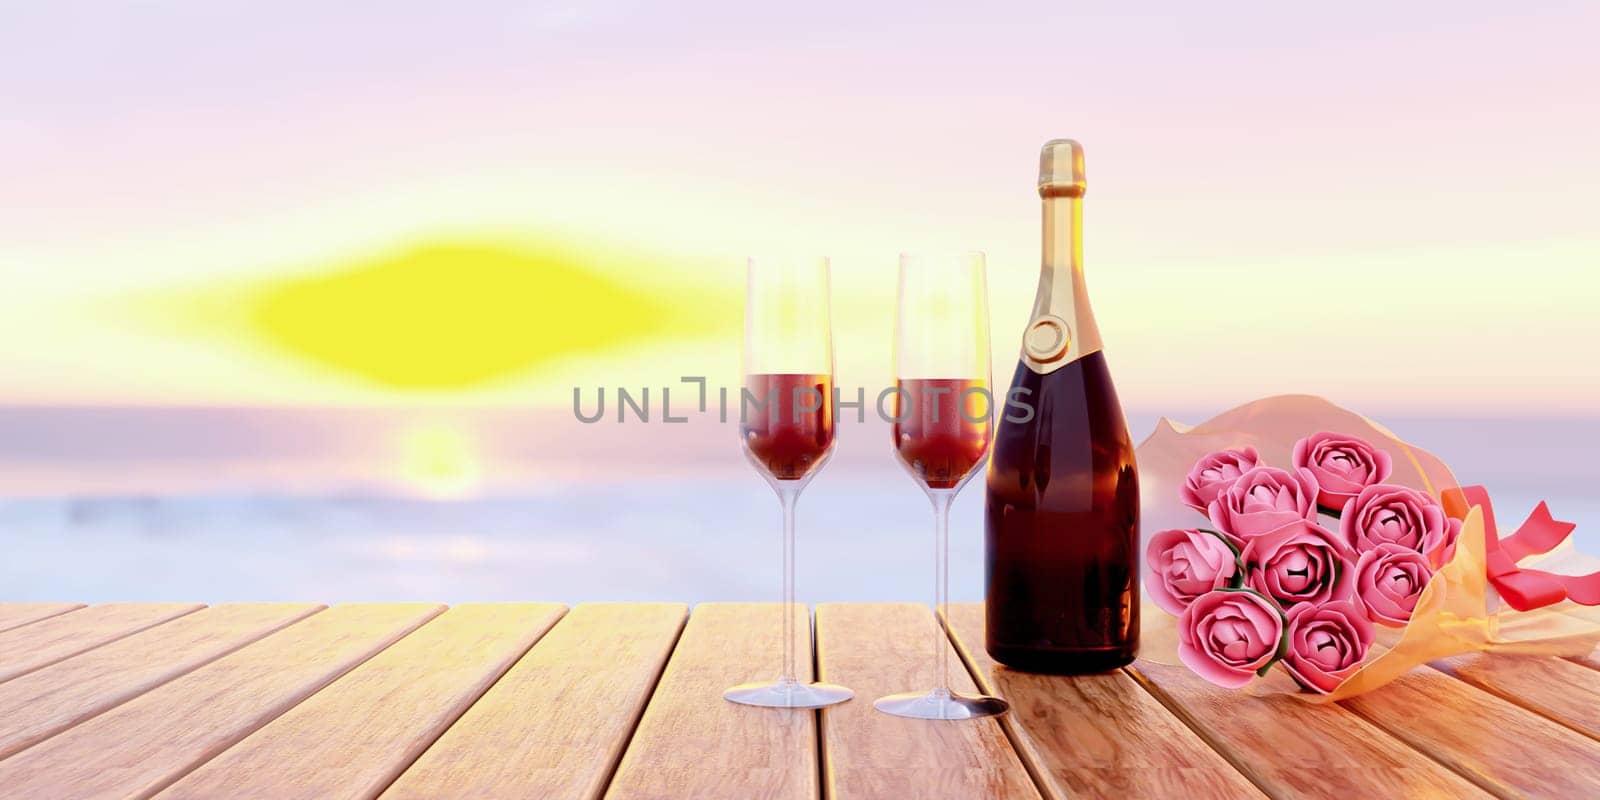 February 14th valentine day 2 champagne glasses and bouquet of roses on a background of the sea relax time on the table. 3d render illustration by meepiangraphic